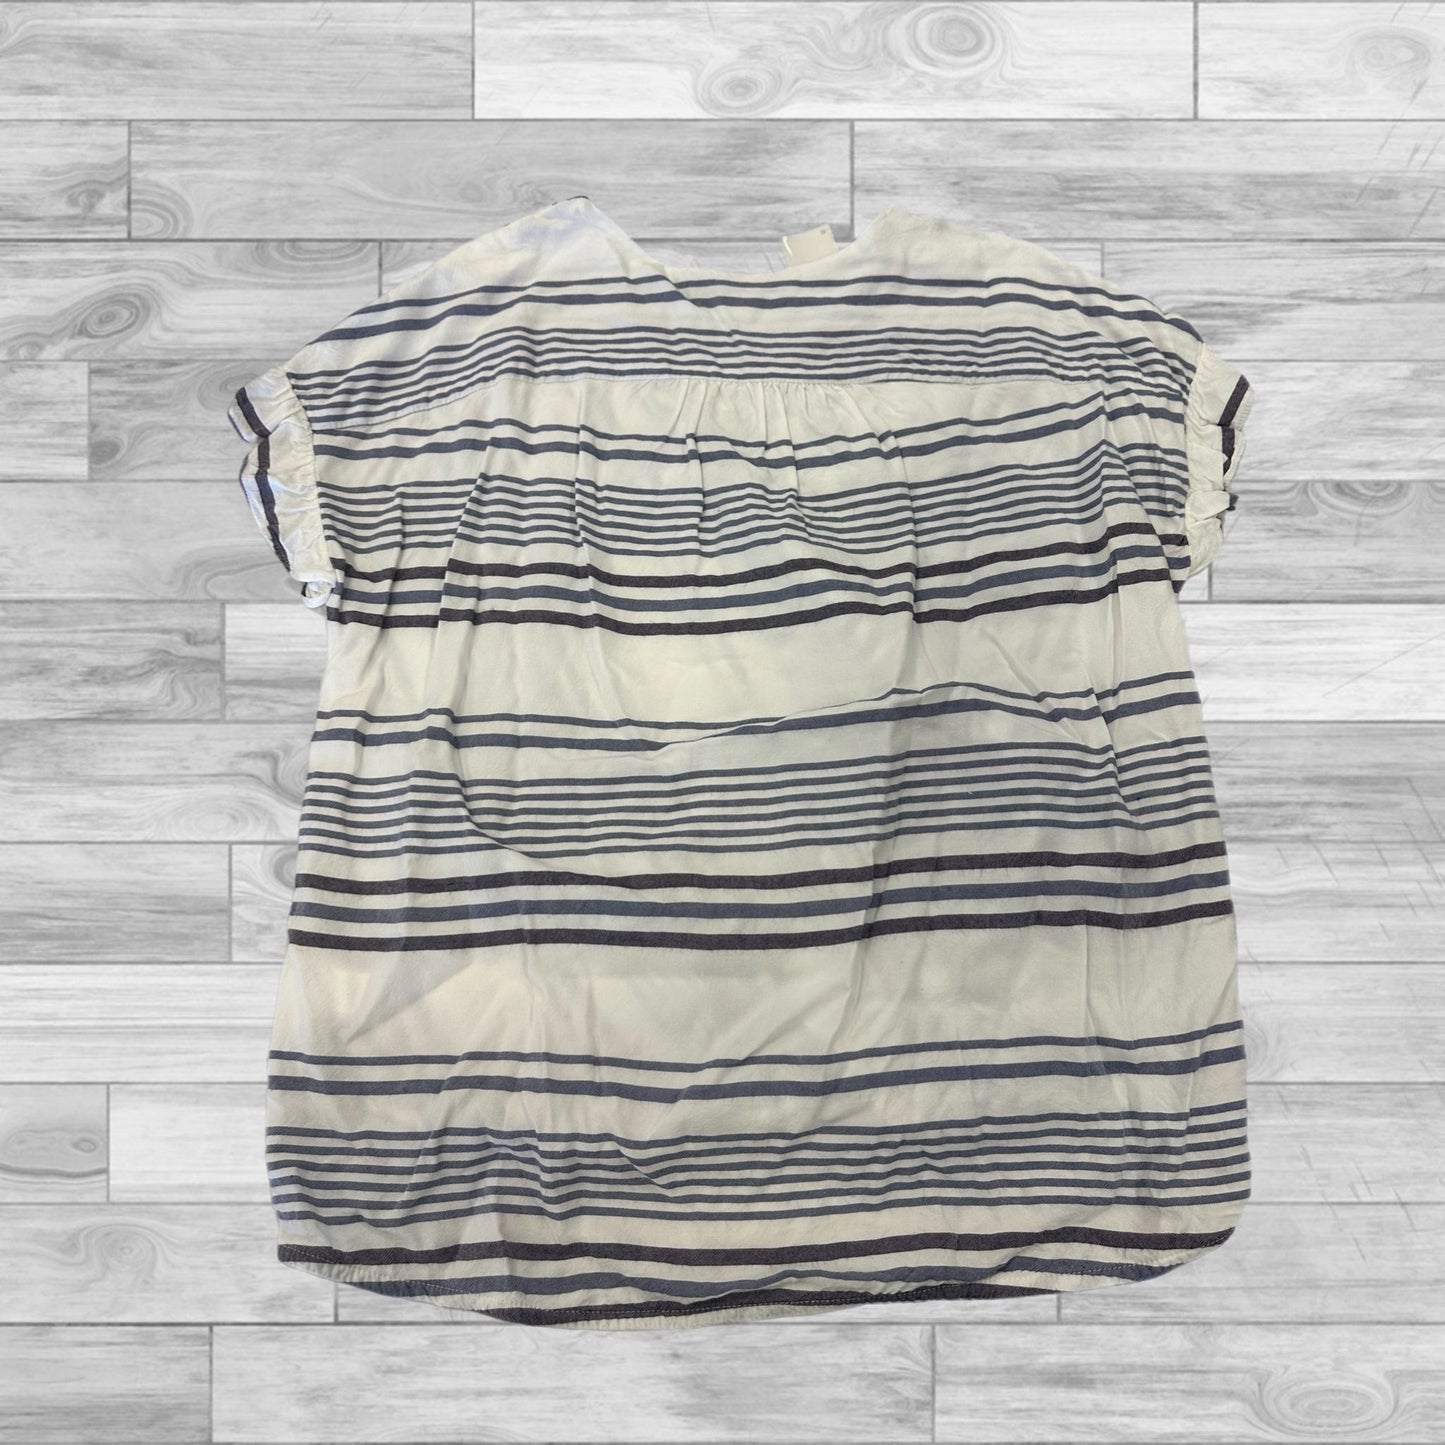 Striped Pattern Top Short Sleeve Fever, Size S